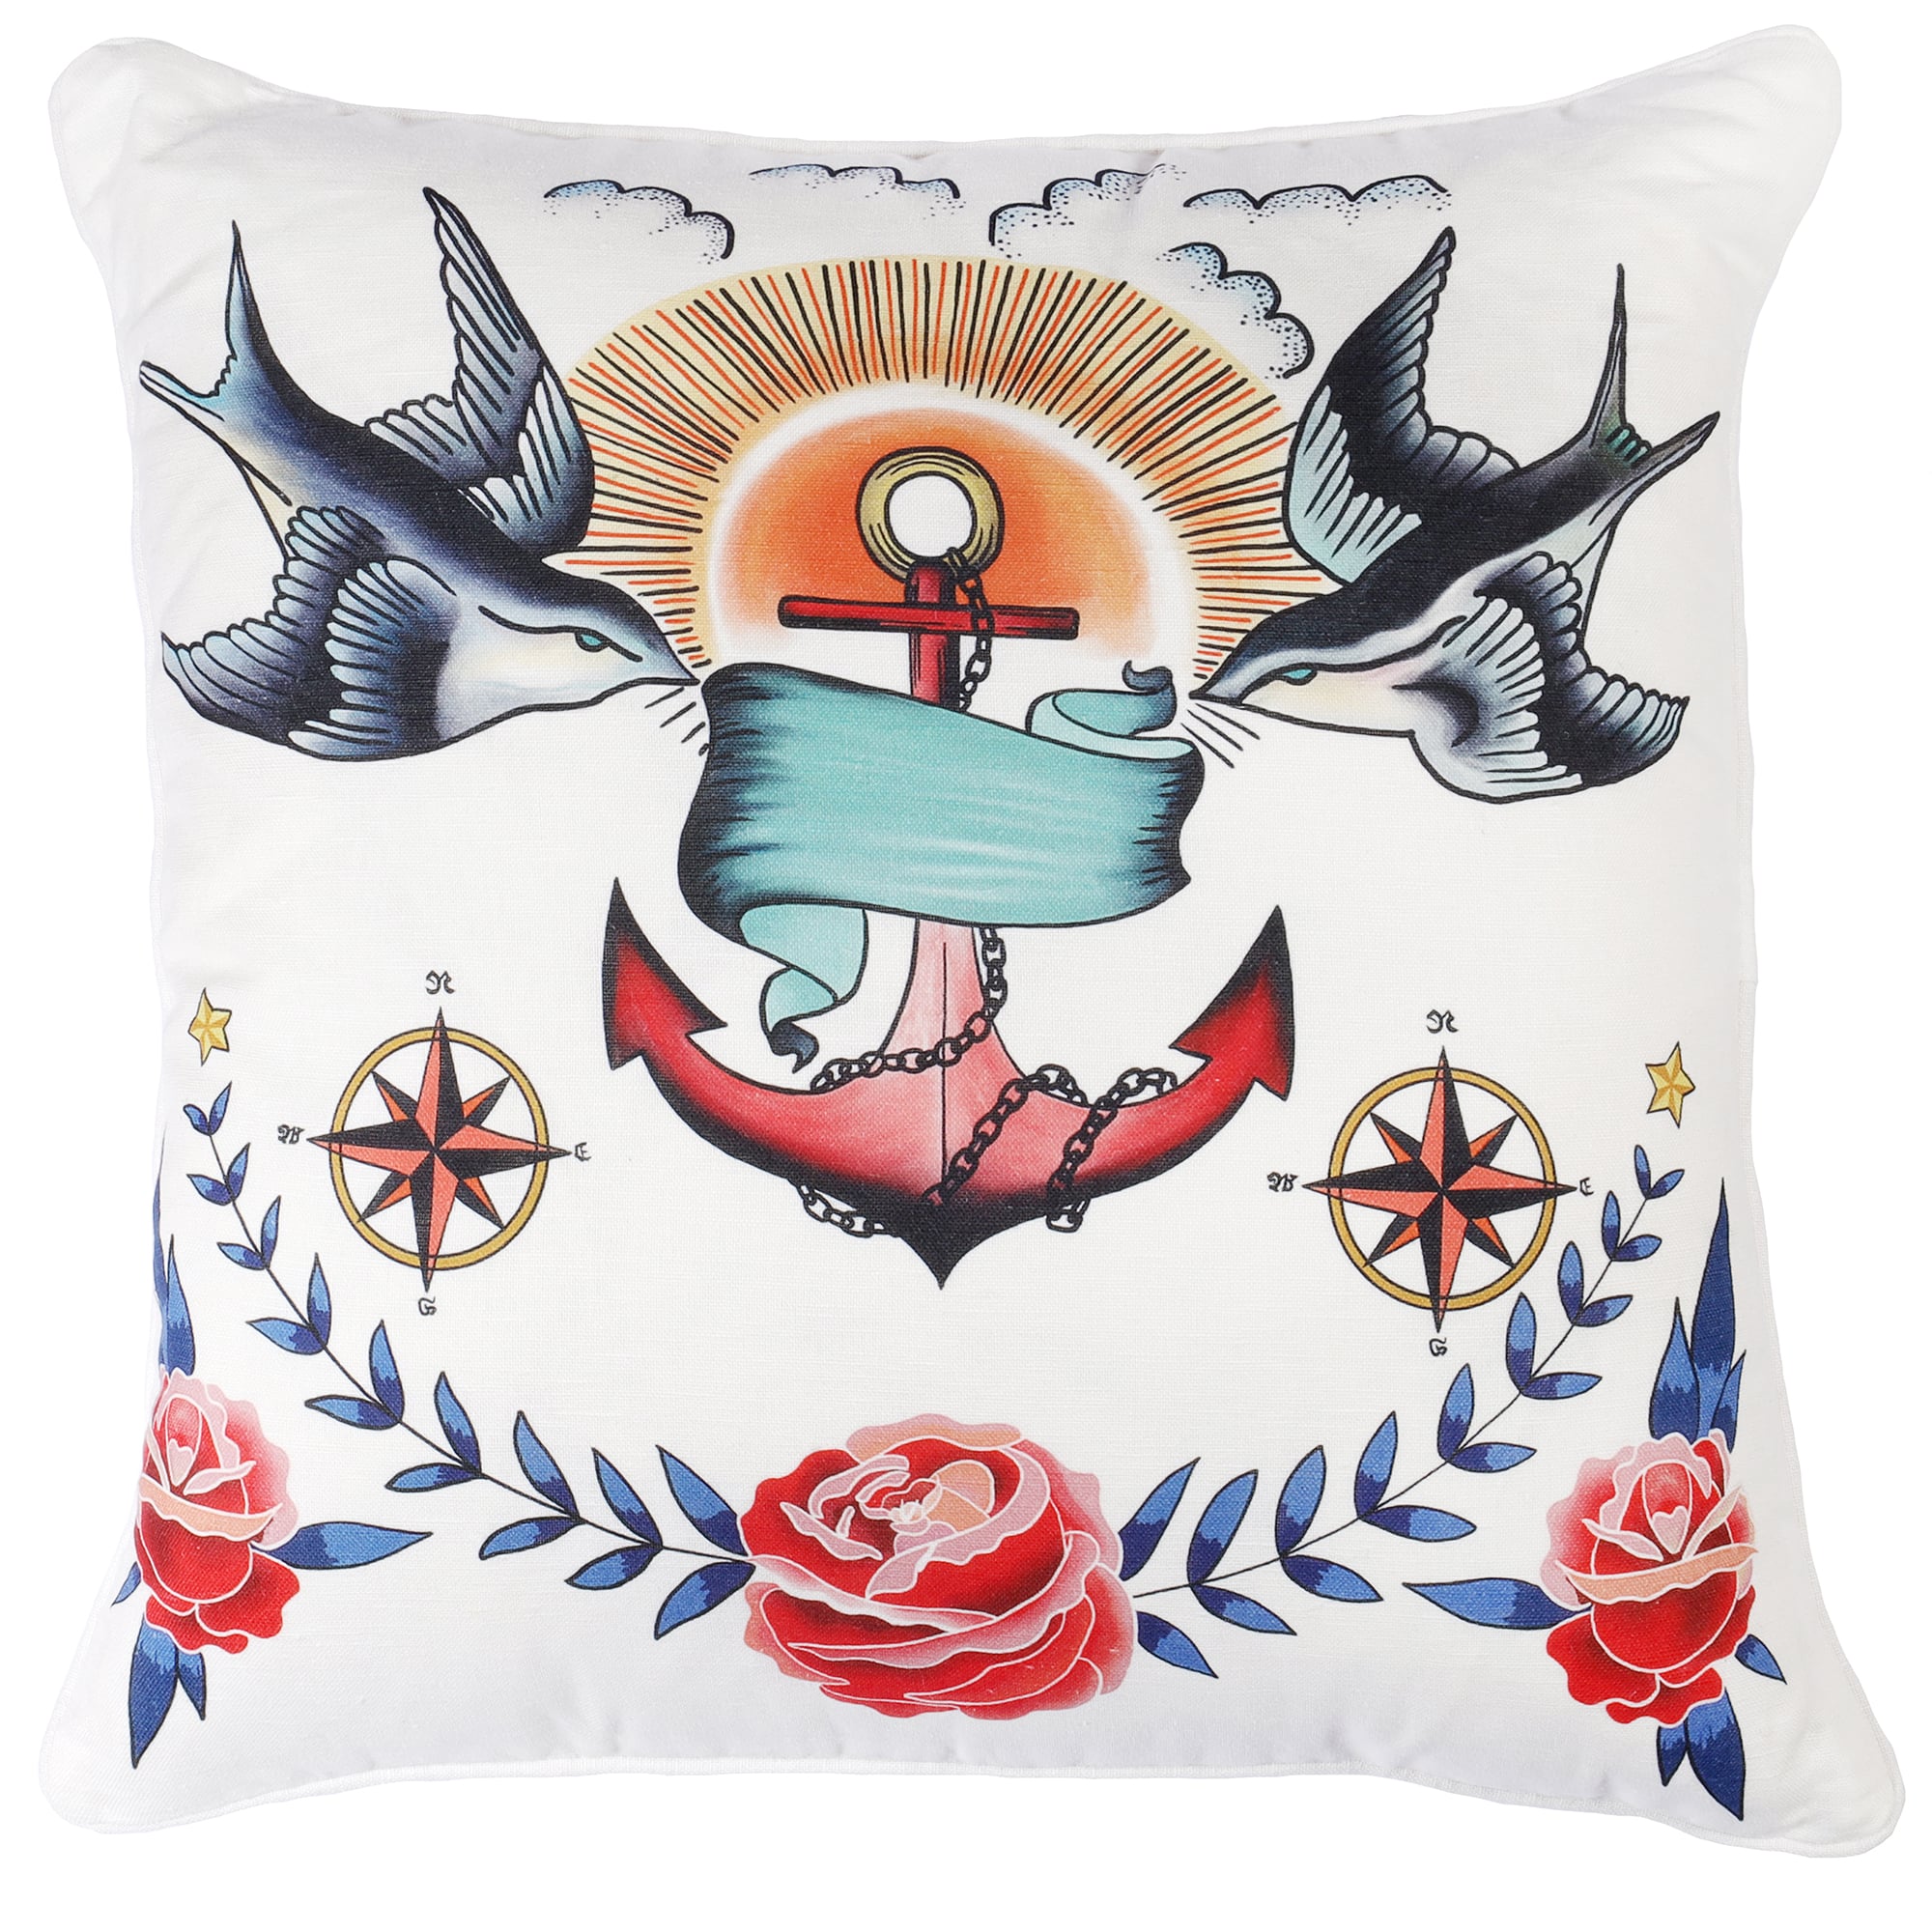 White cushion with sailor's tattoo inspired brightly coloured design of swallows, anchor and roses. 